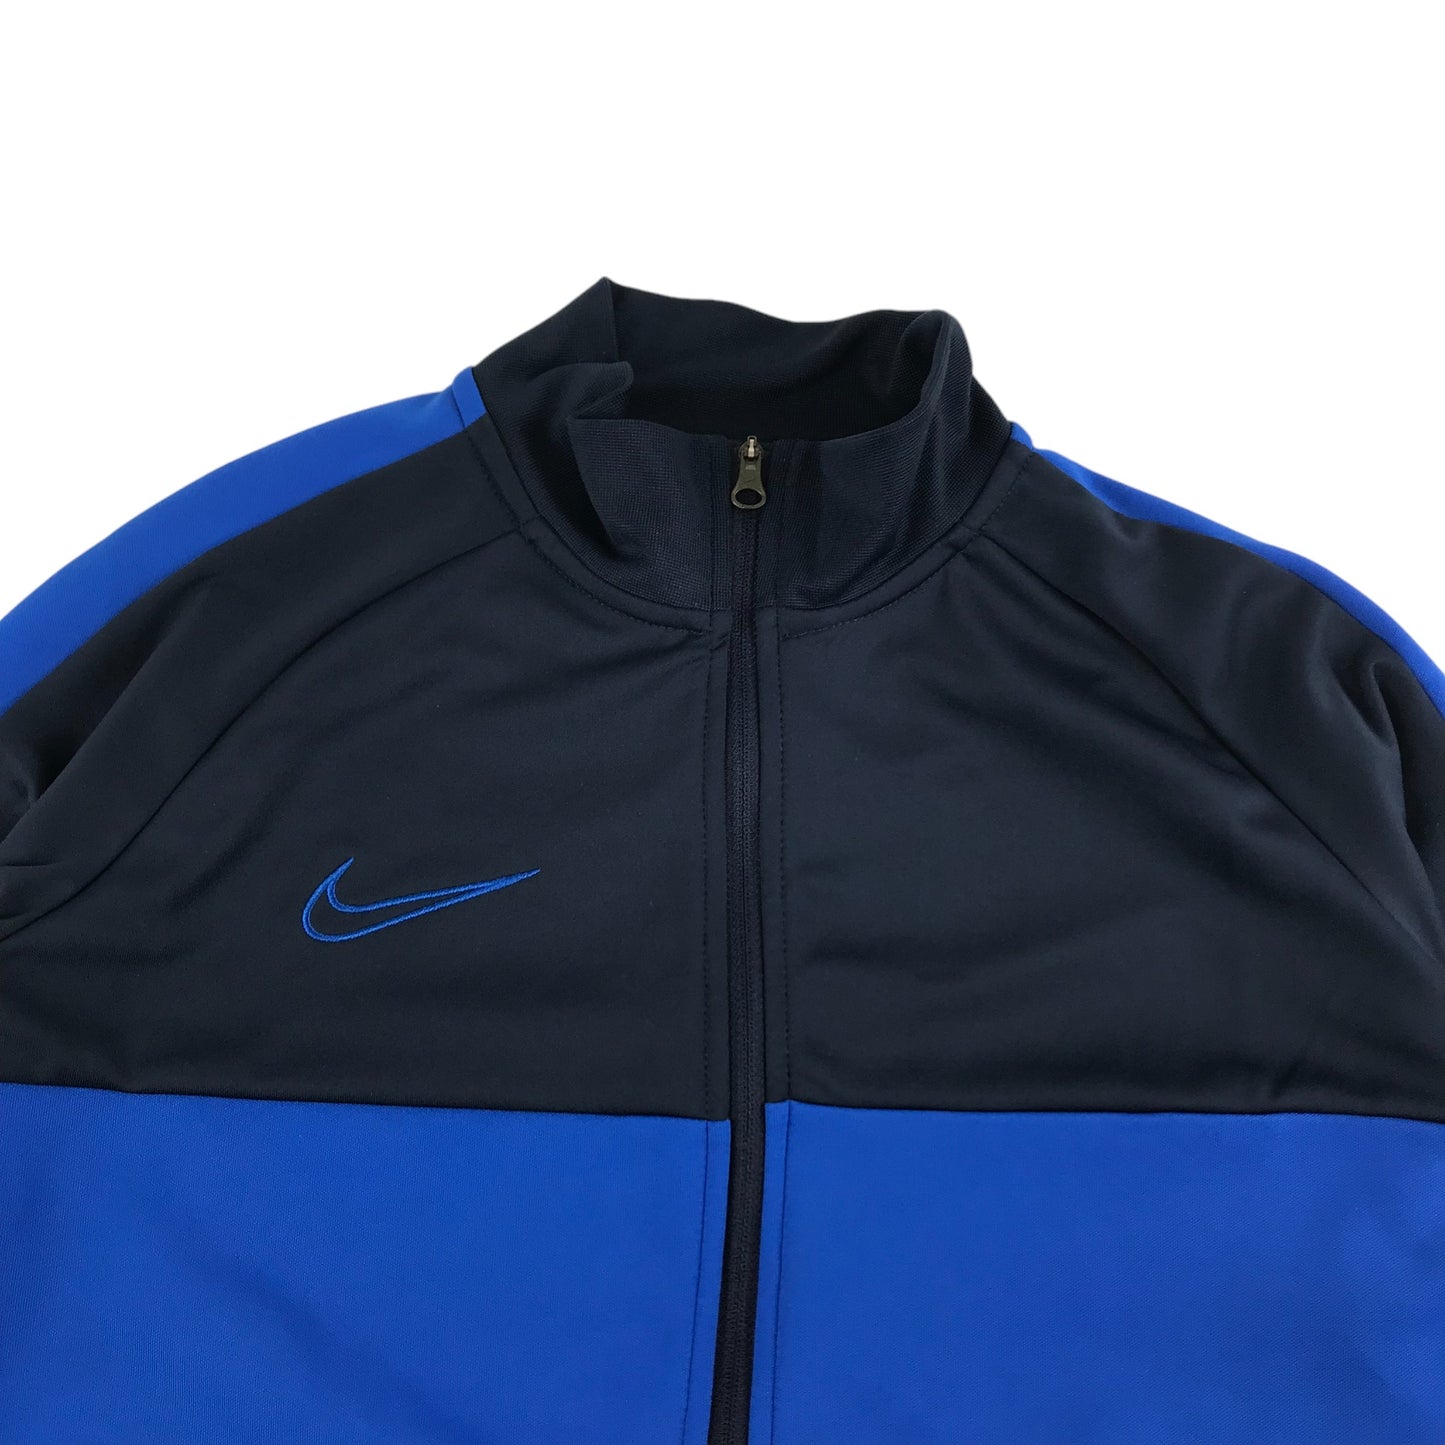 Nike Sweatshirt Age 12 Navy and Blue Panelled Full Zipper Top